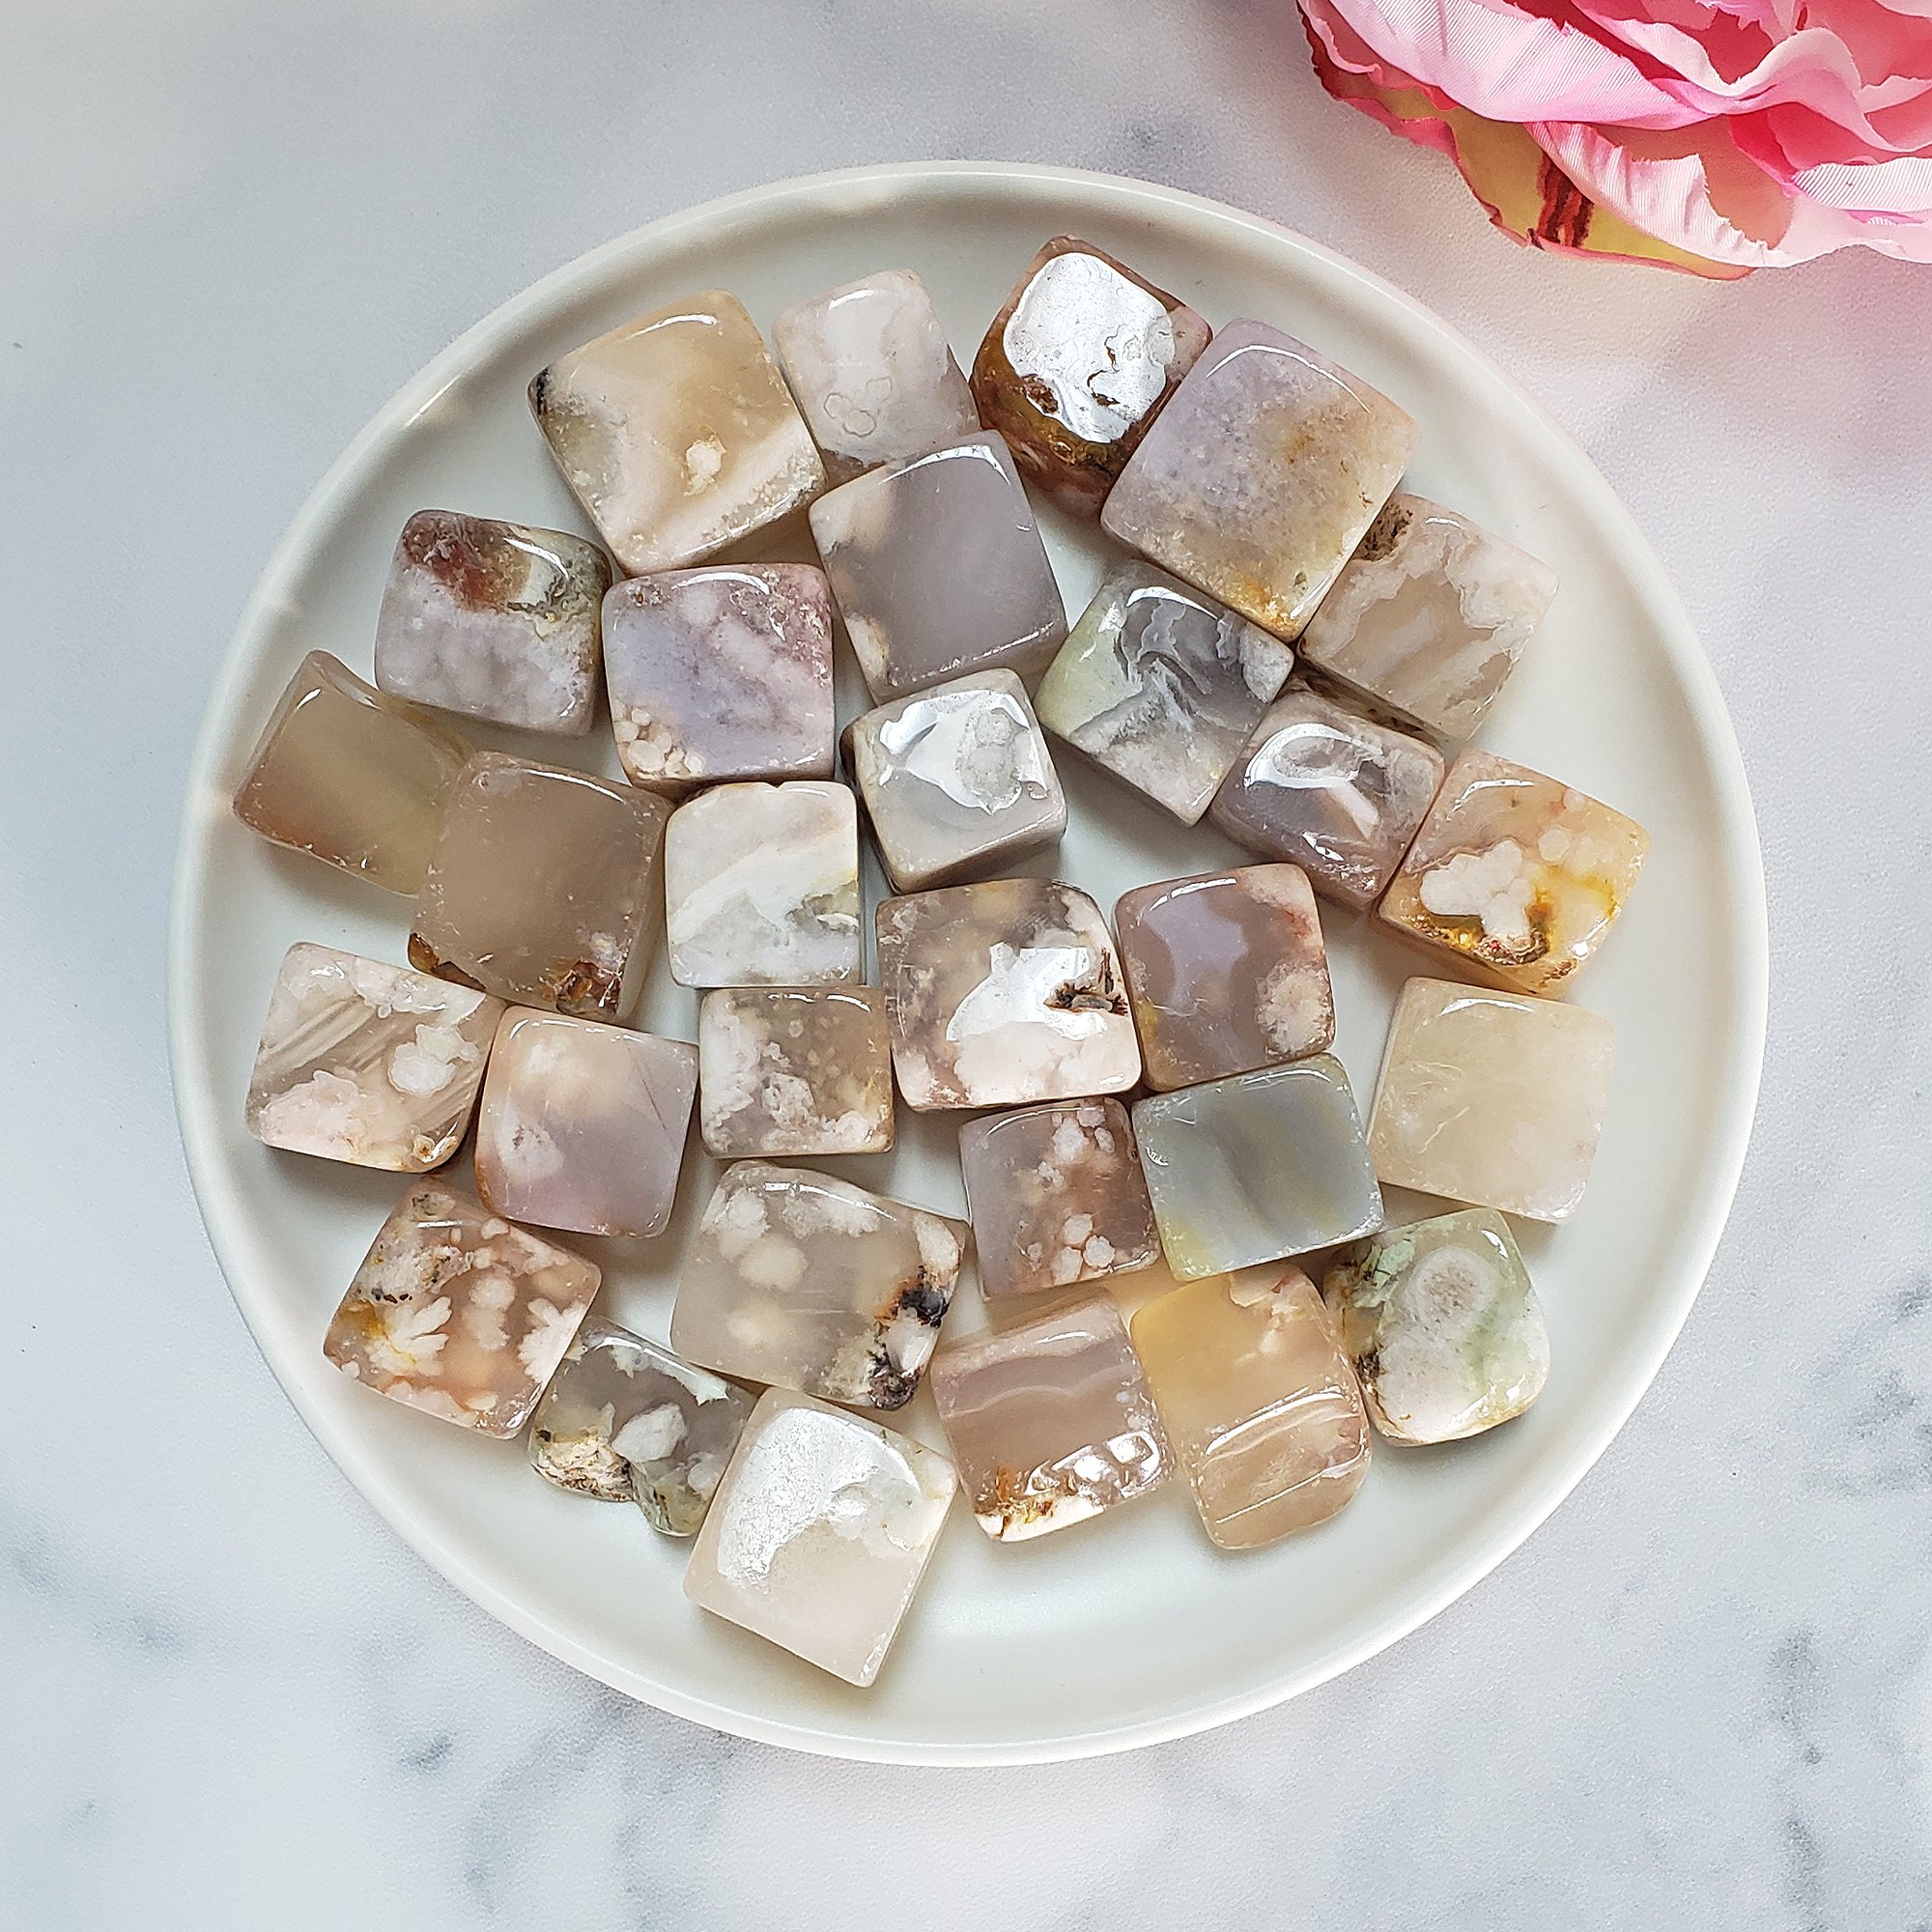 Cherry Blossom Flower Agate Chalcedony Natural Gemstone Tumbled Crystal - Flower Plume Agate Cubes in White Ceramic Dish